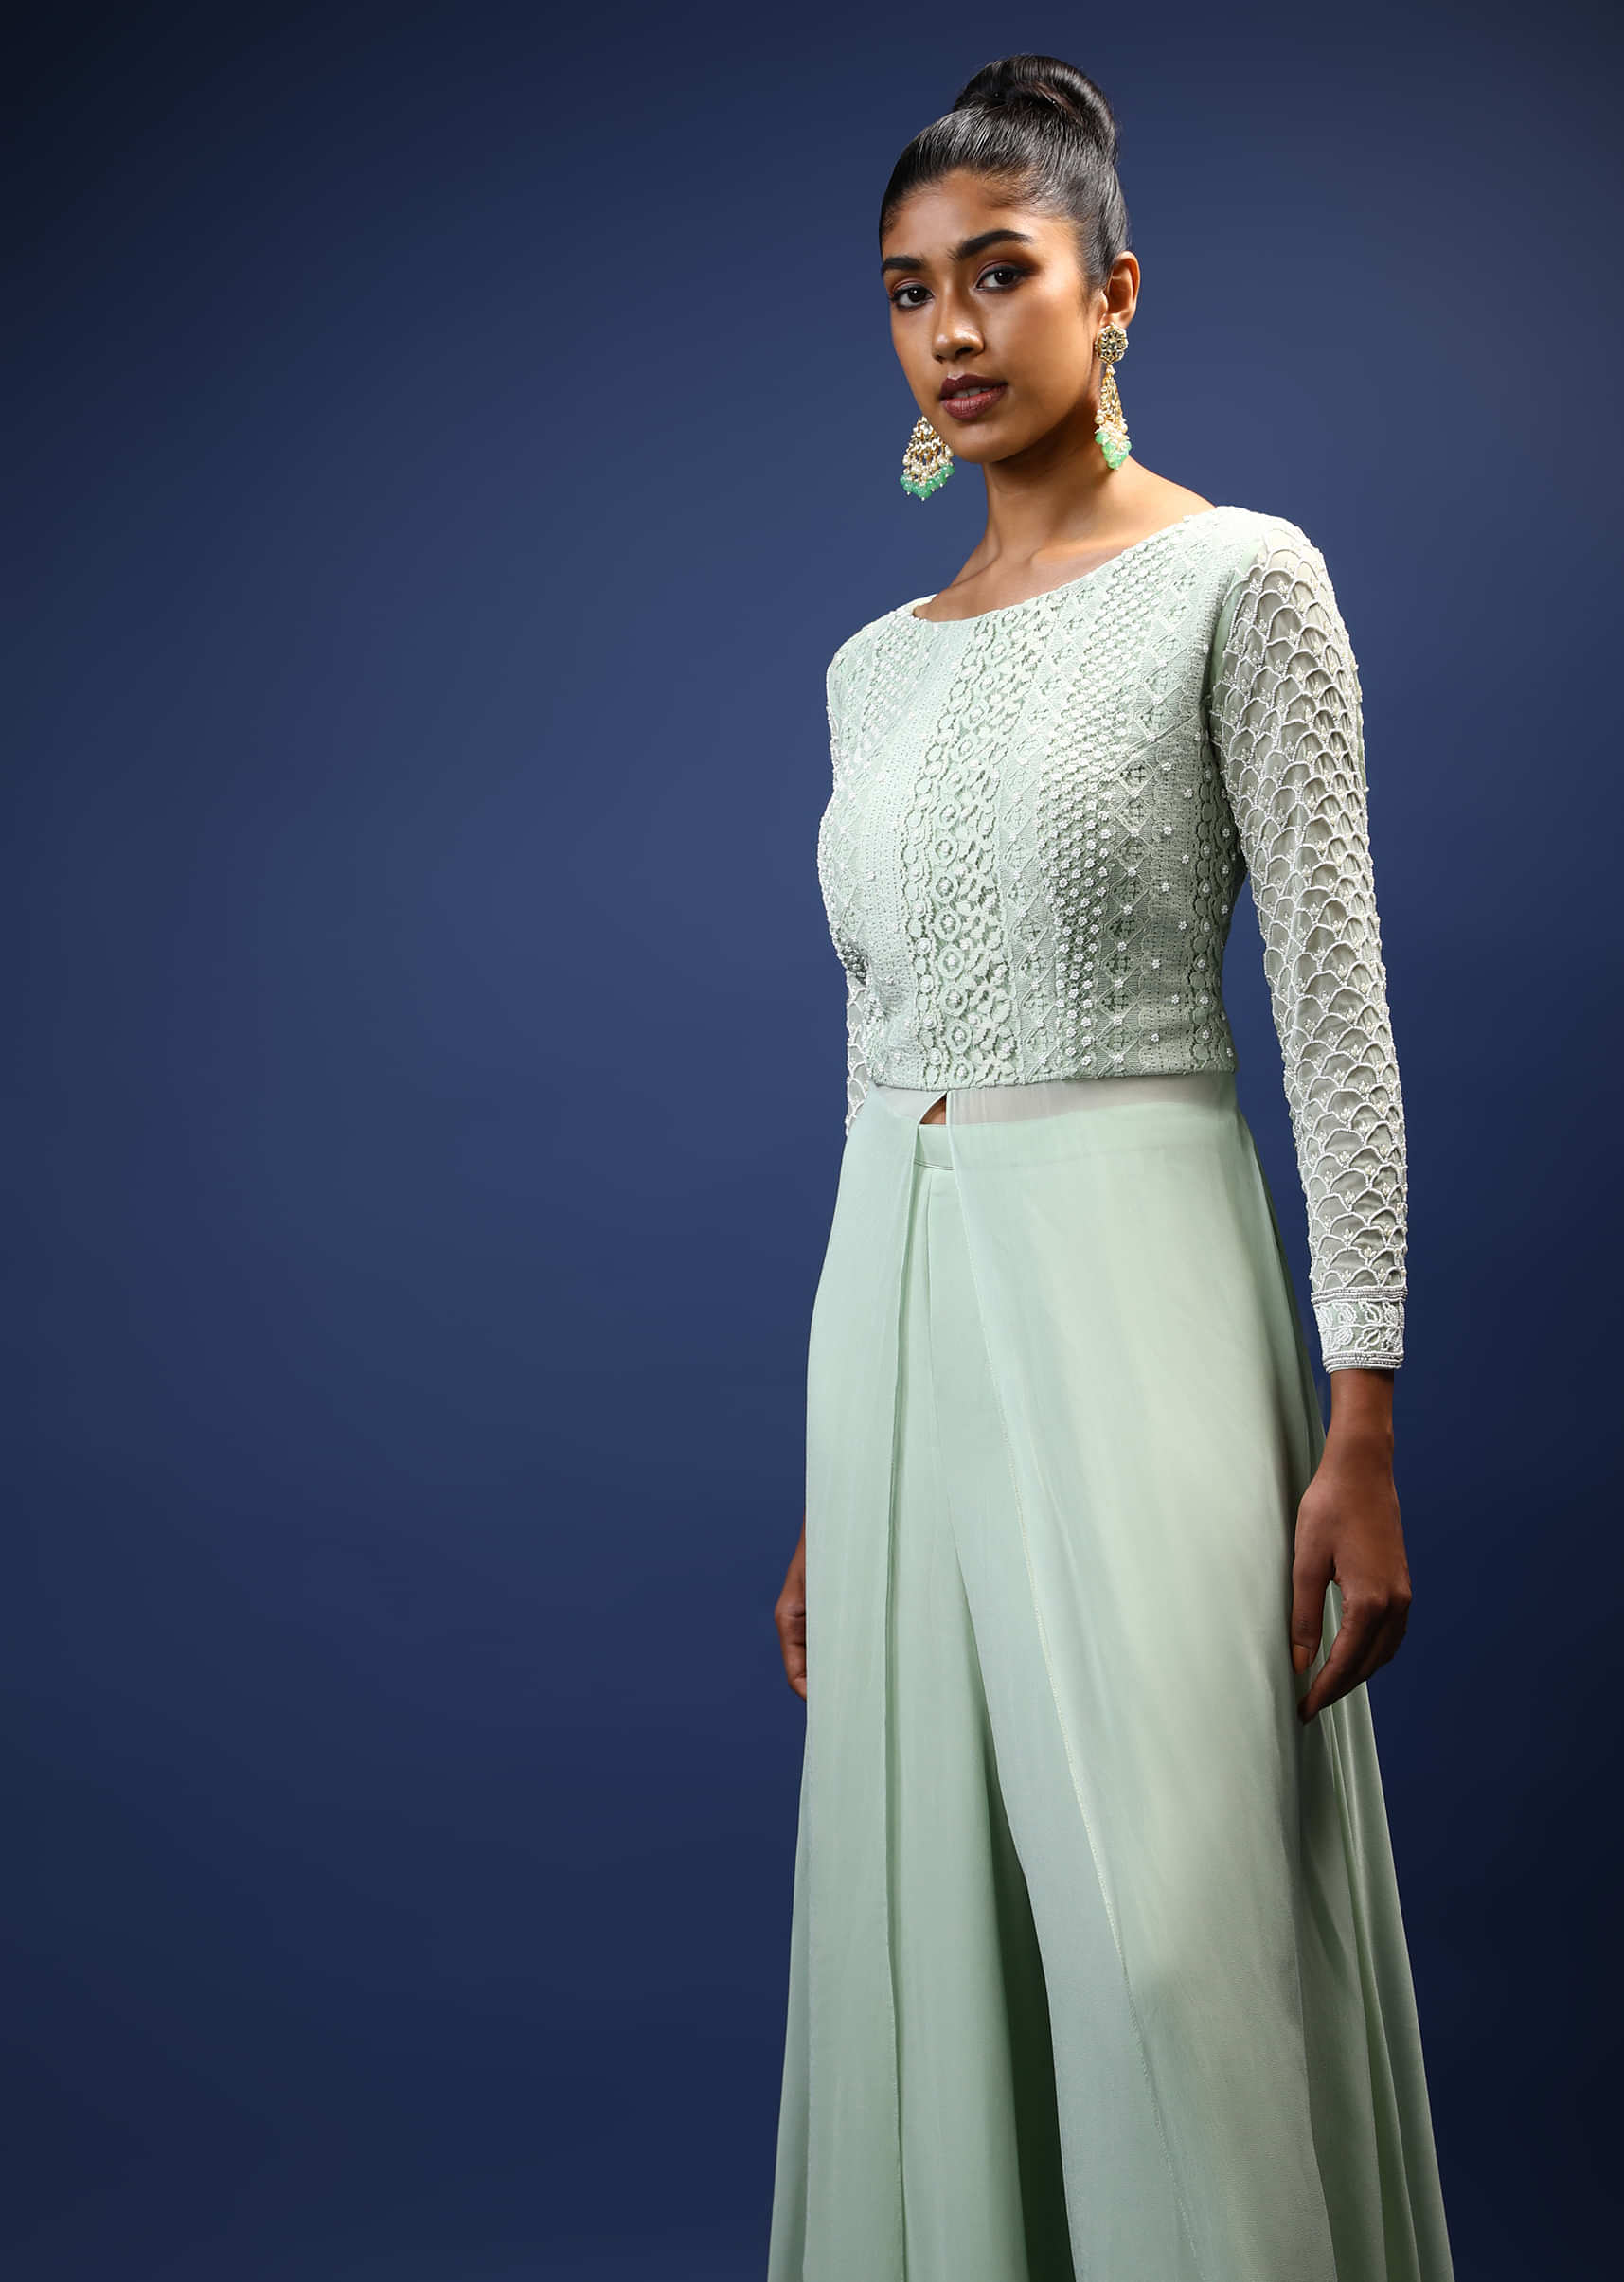 Pastel Green Palazzo Suit In Georgette With A Long Slit Top In Crochet Lace Adorned In Moti Bead Detailing  